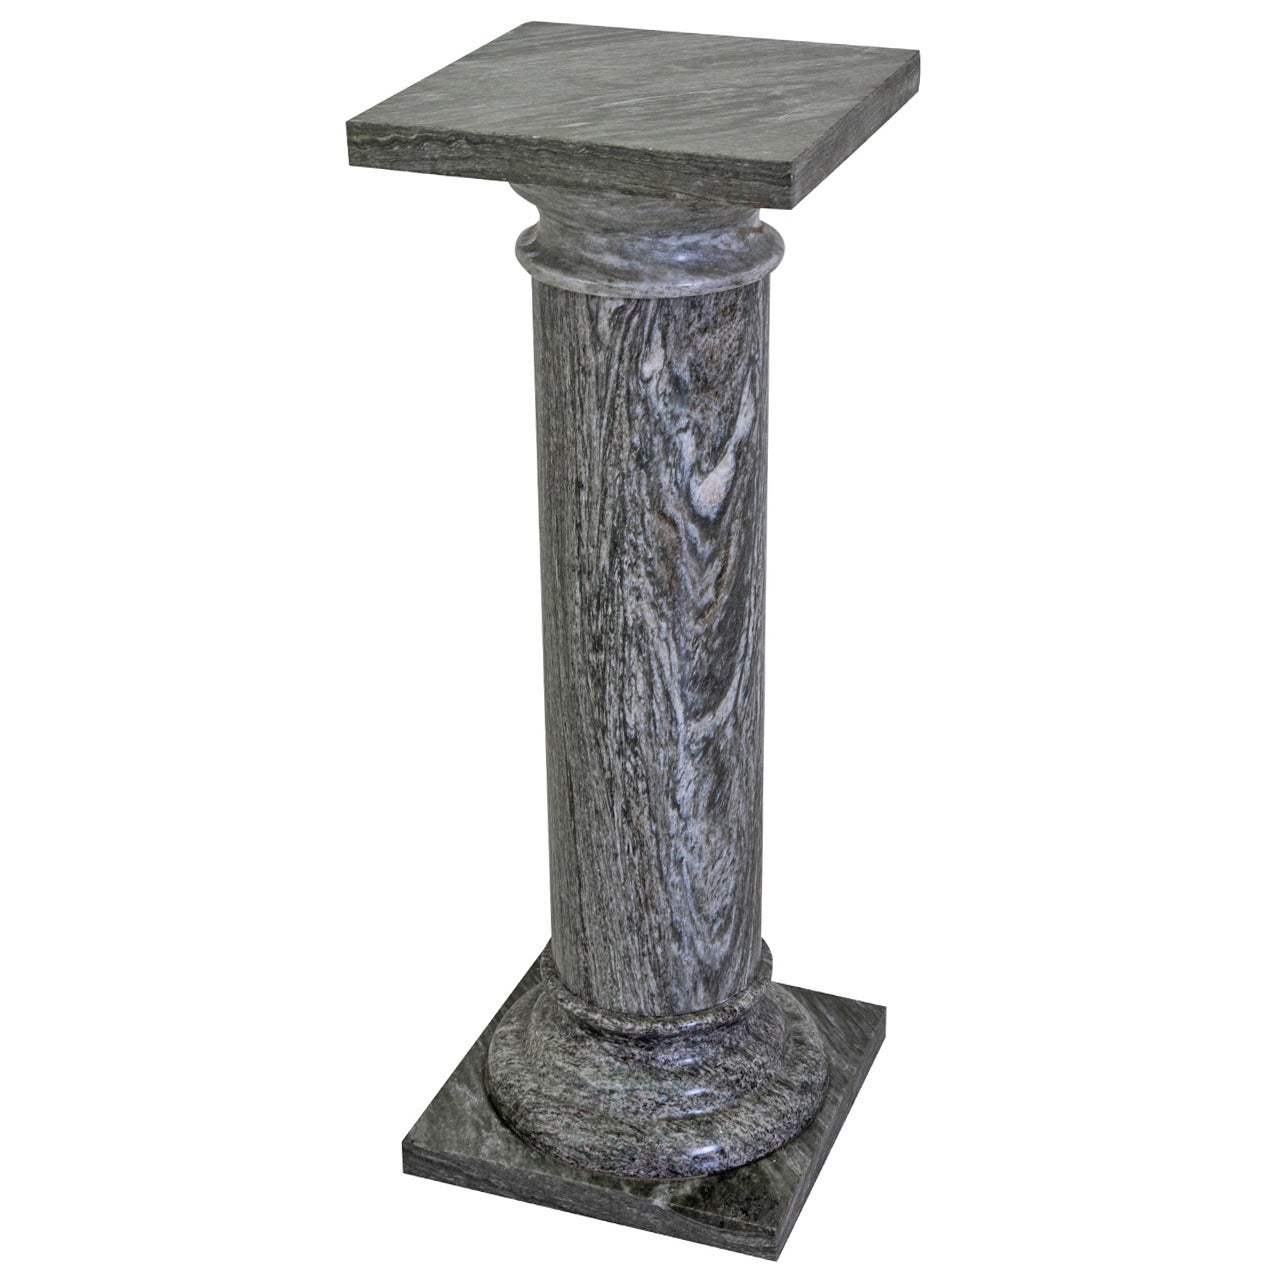 Large Classical Marble Column or Pedestal in Deep Gray